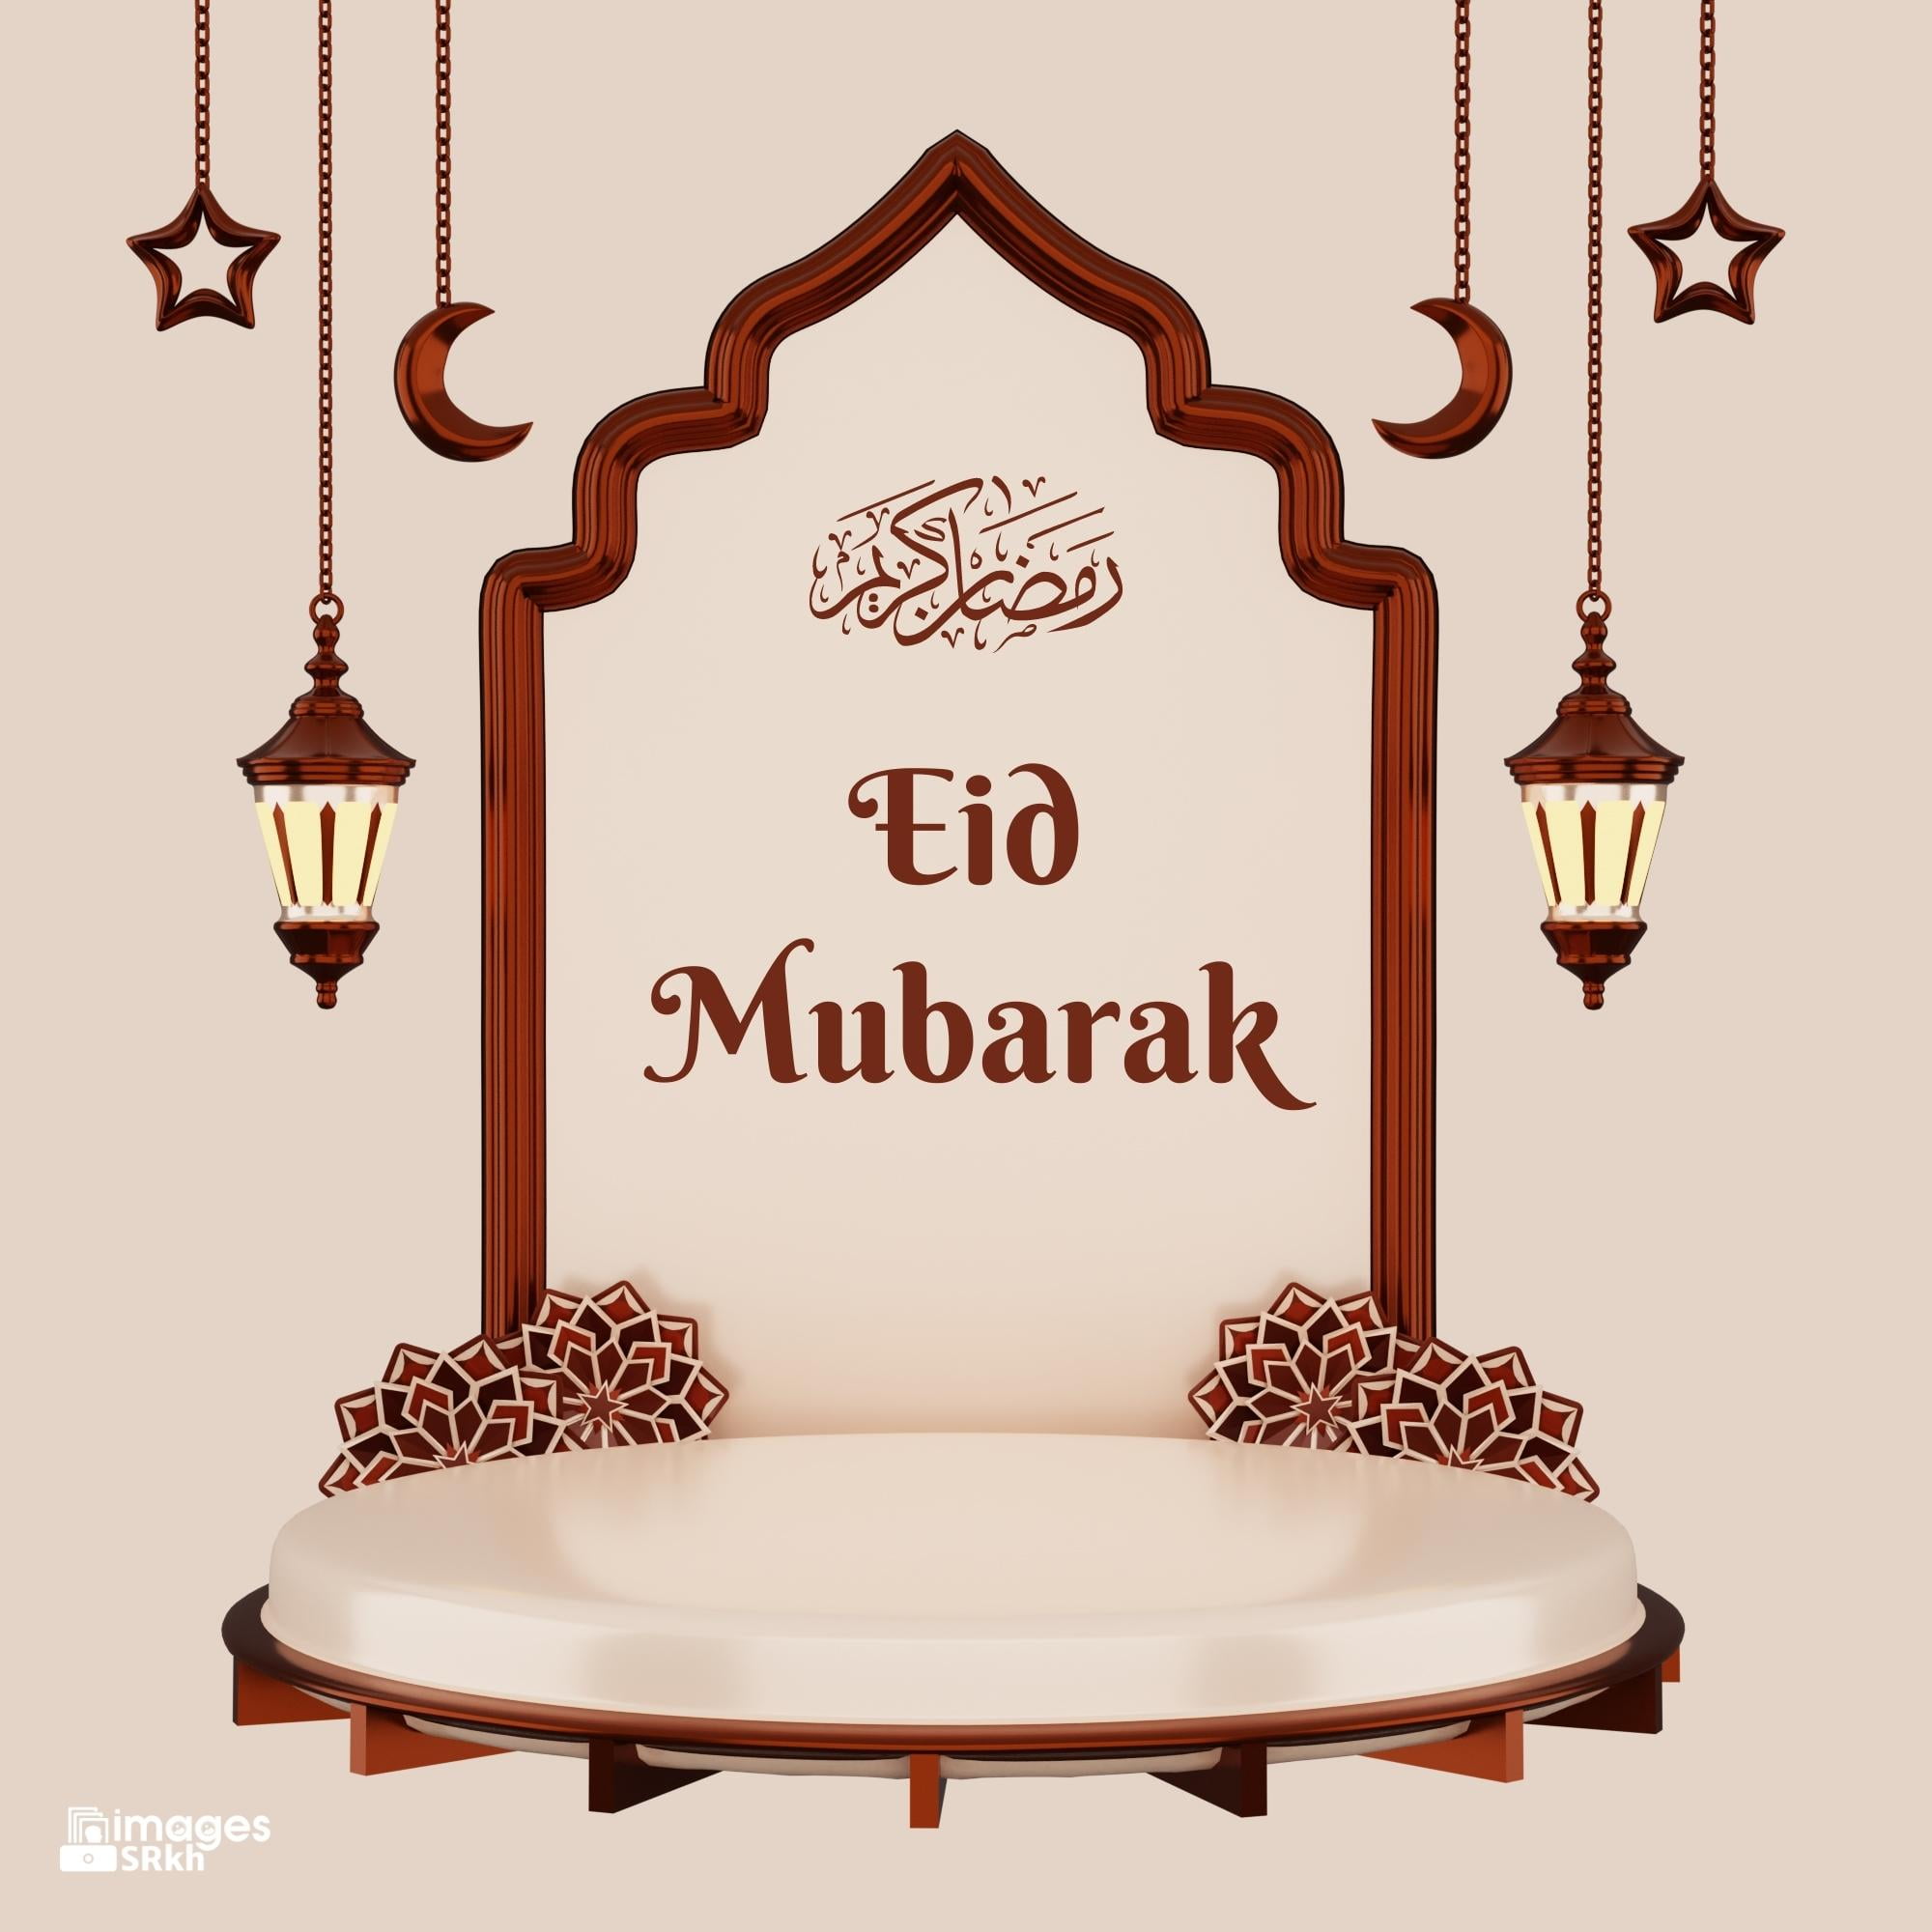 Wishes To Eid Mubarak (12) | Download free in Hd Quality | imagesSRkh